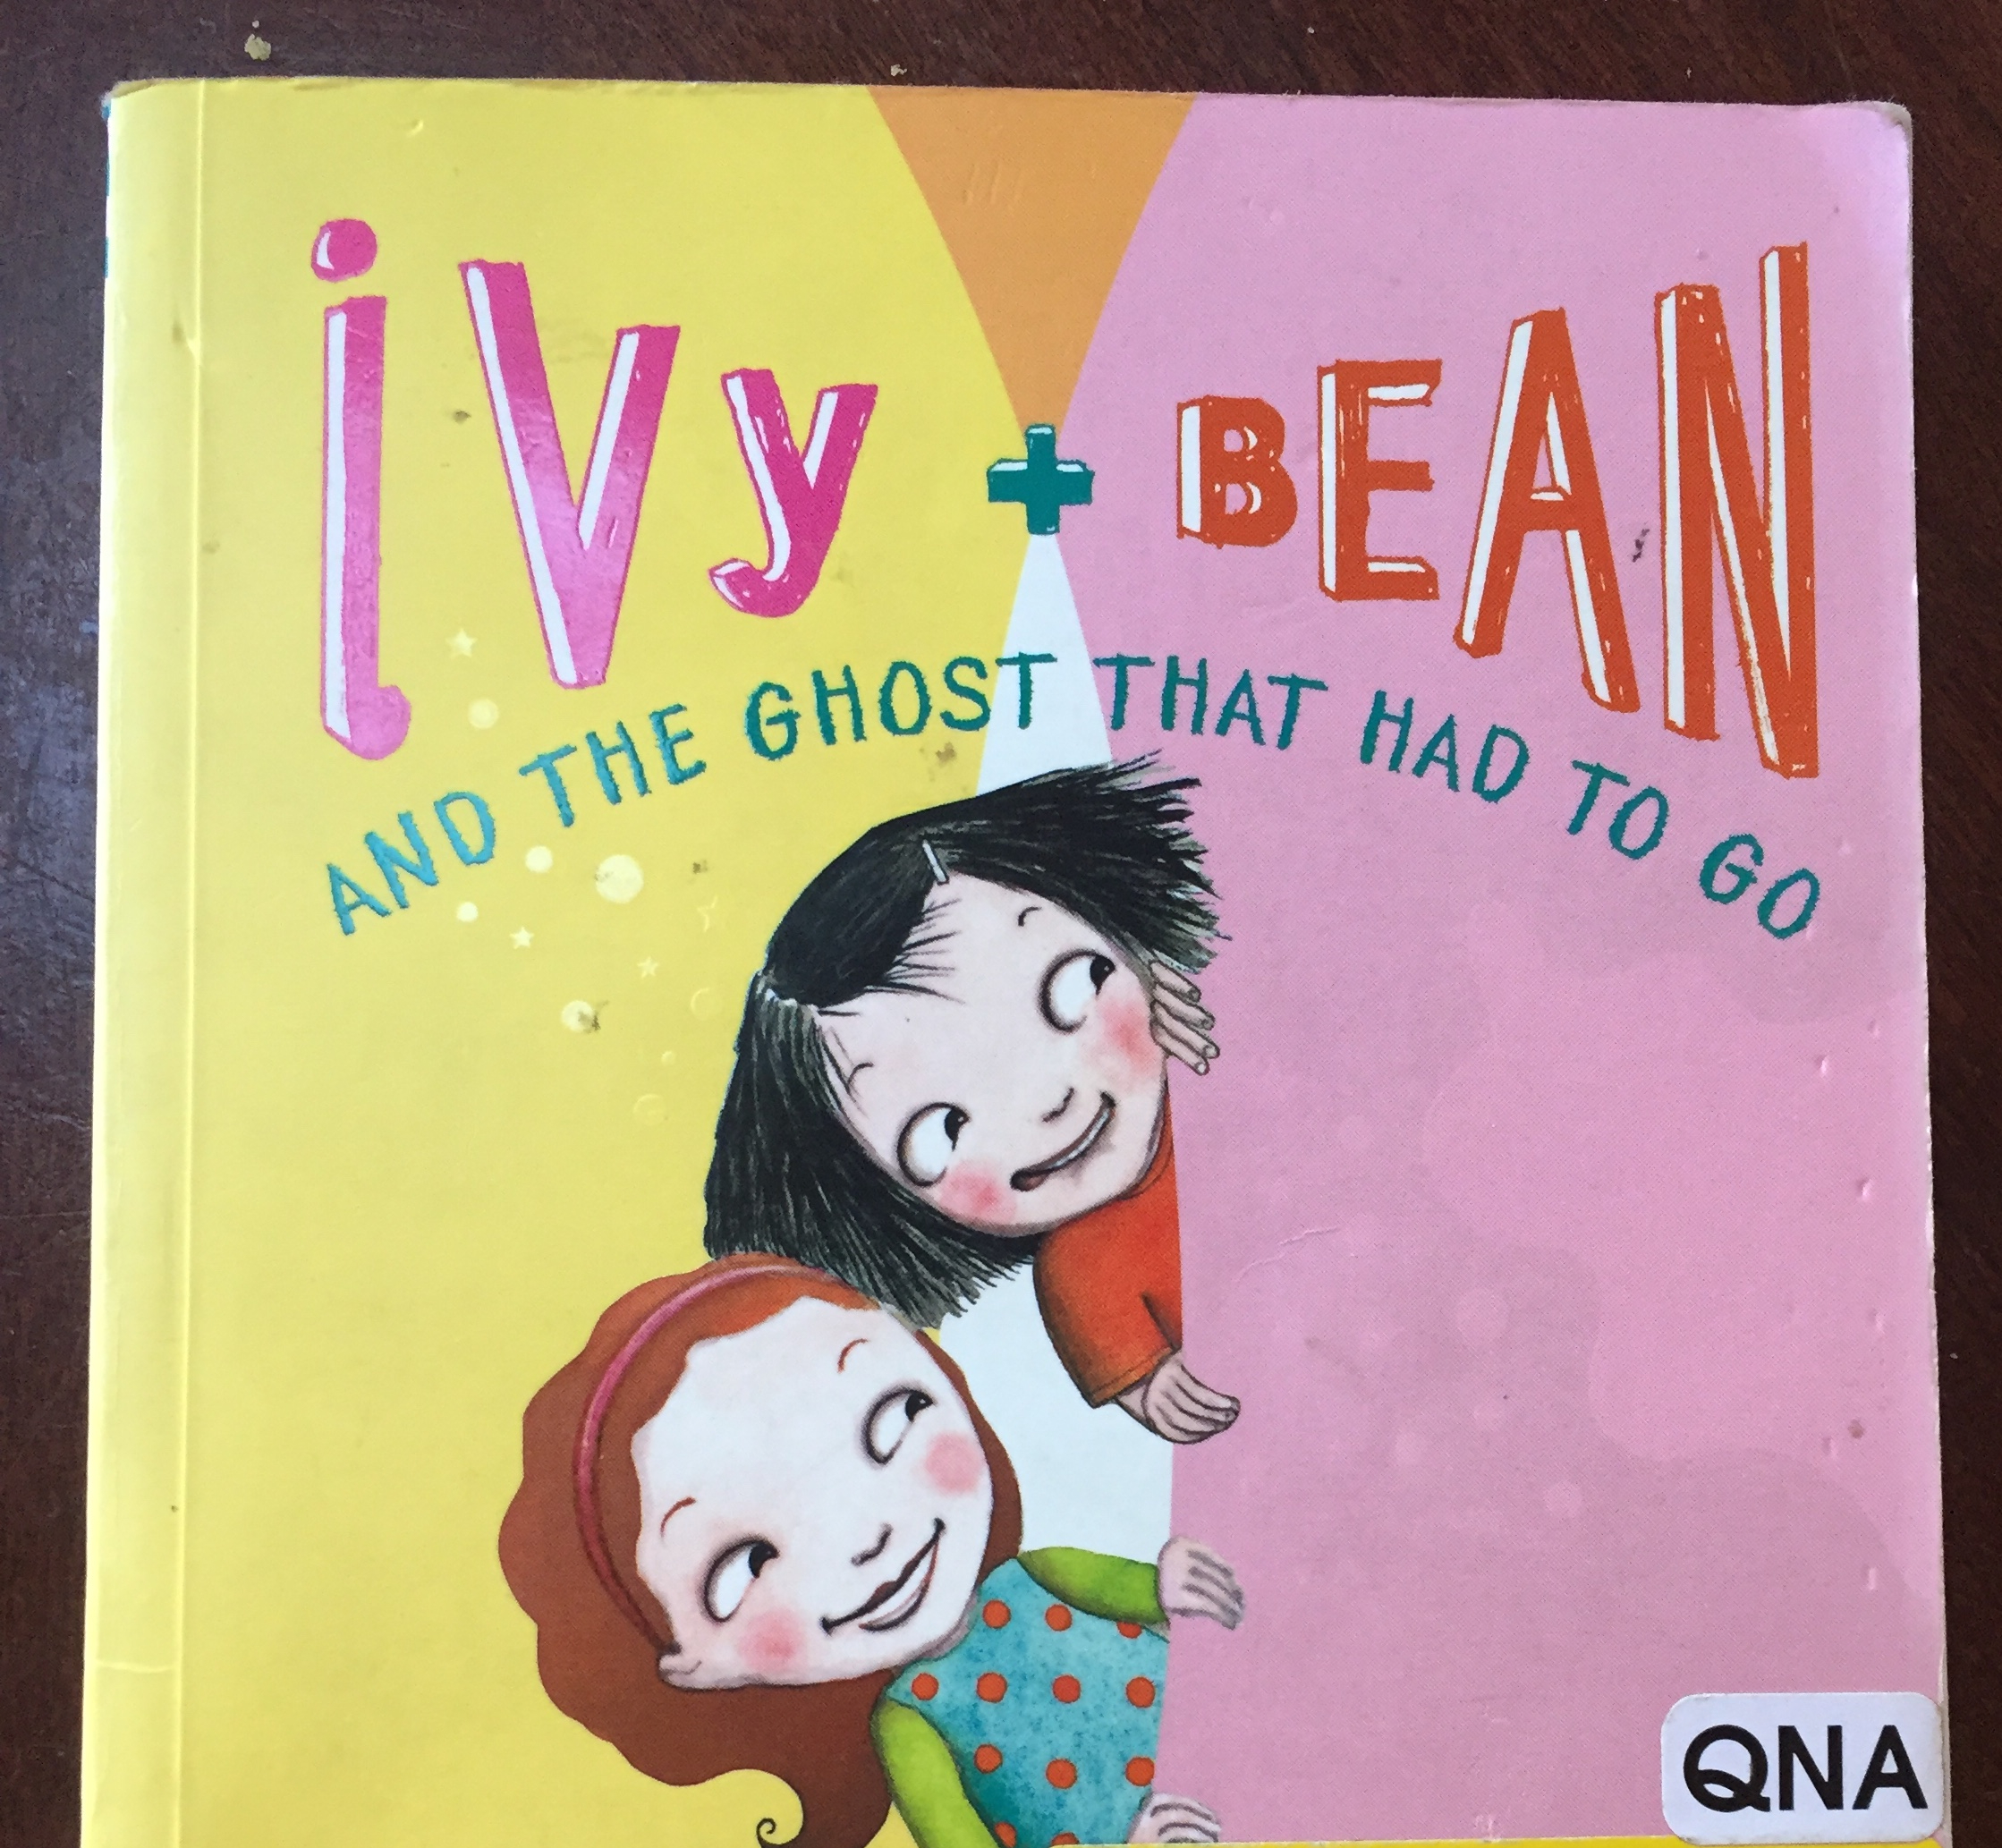 Ivy and Bean and the Ghost That Had to Go book cover by Annie Barrows chapter book for kids